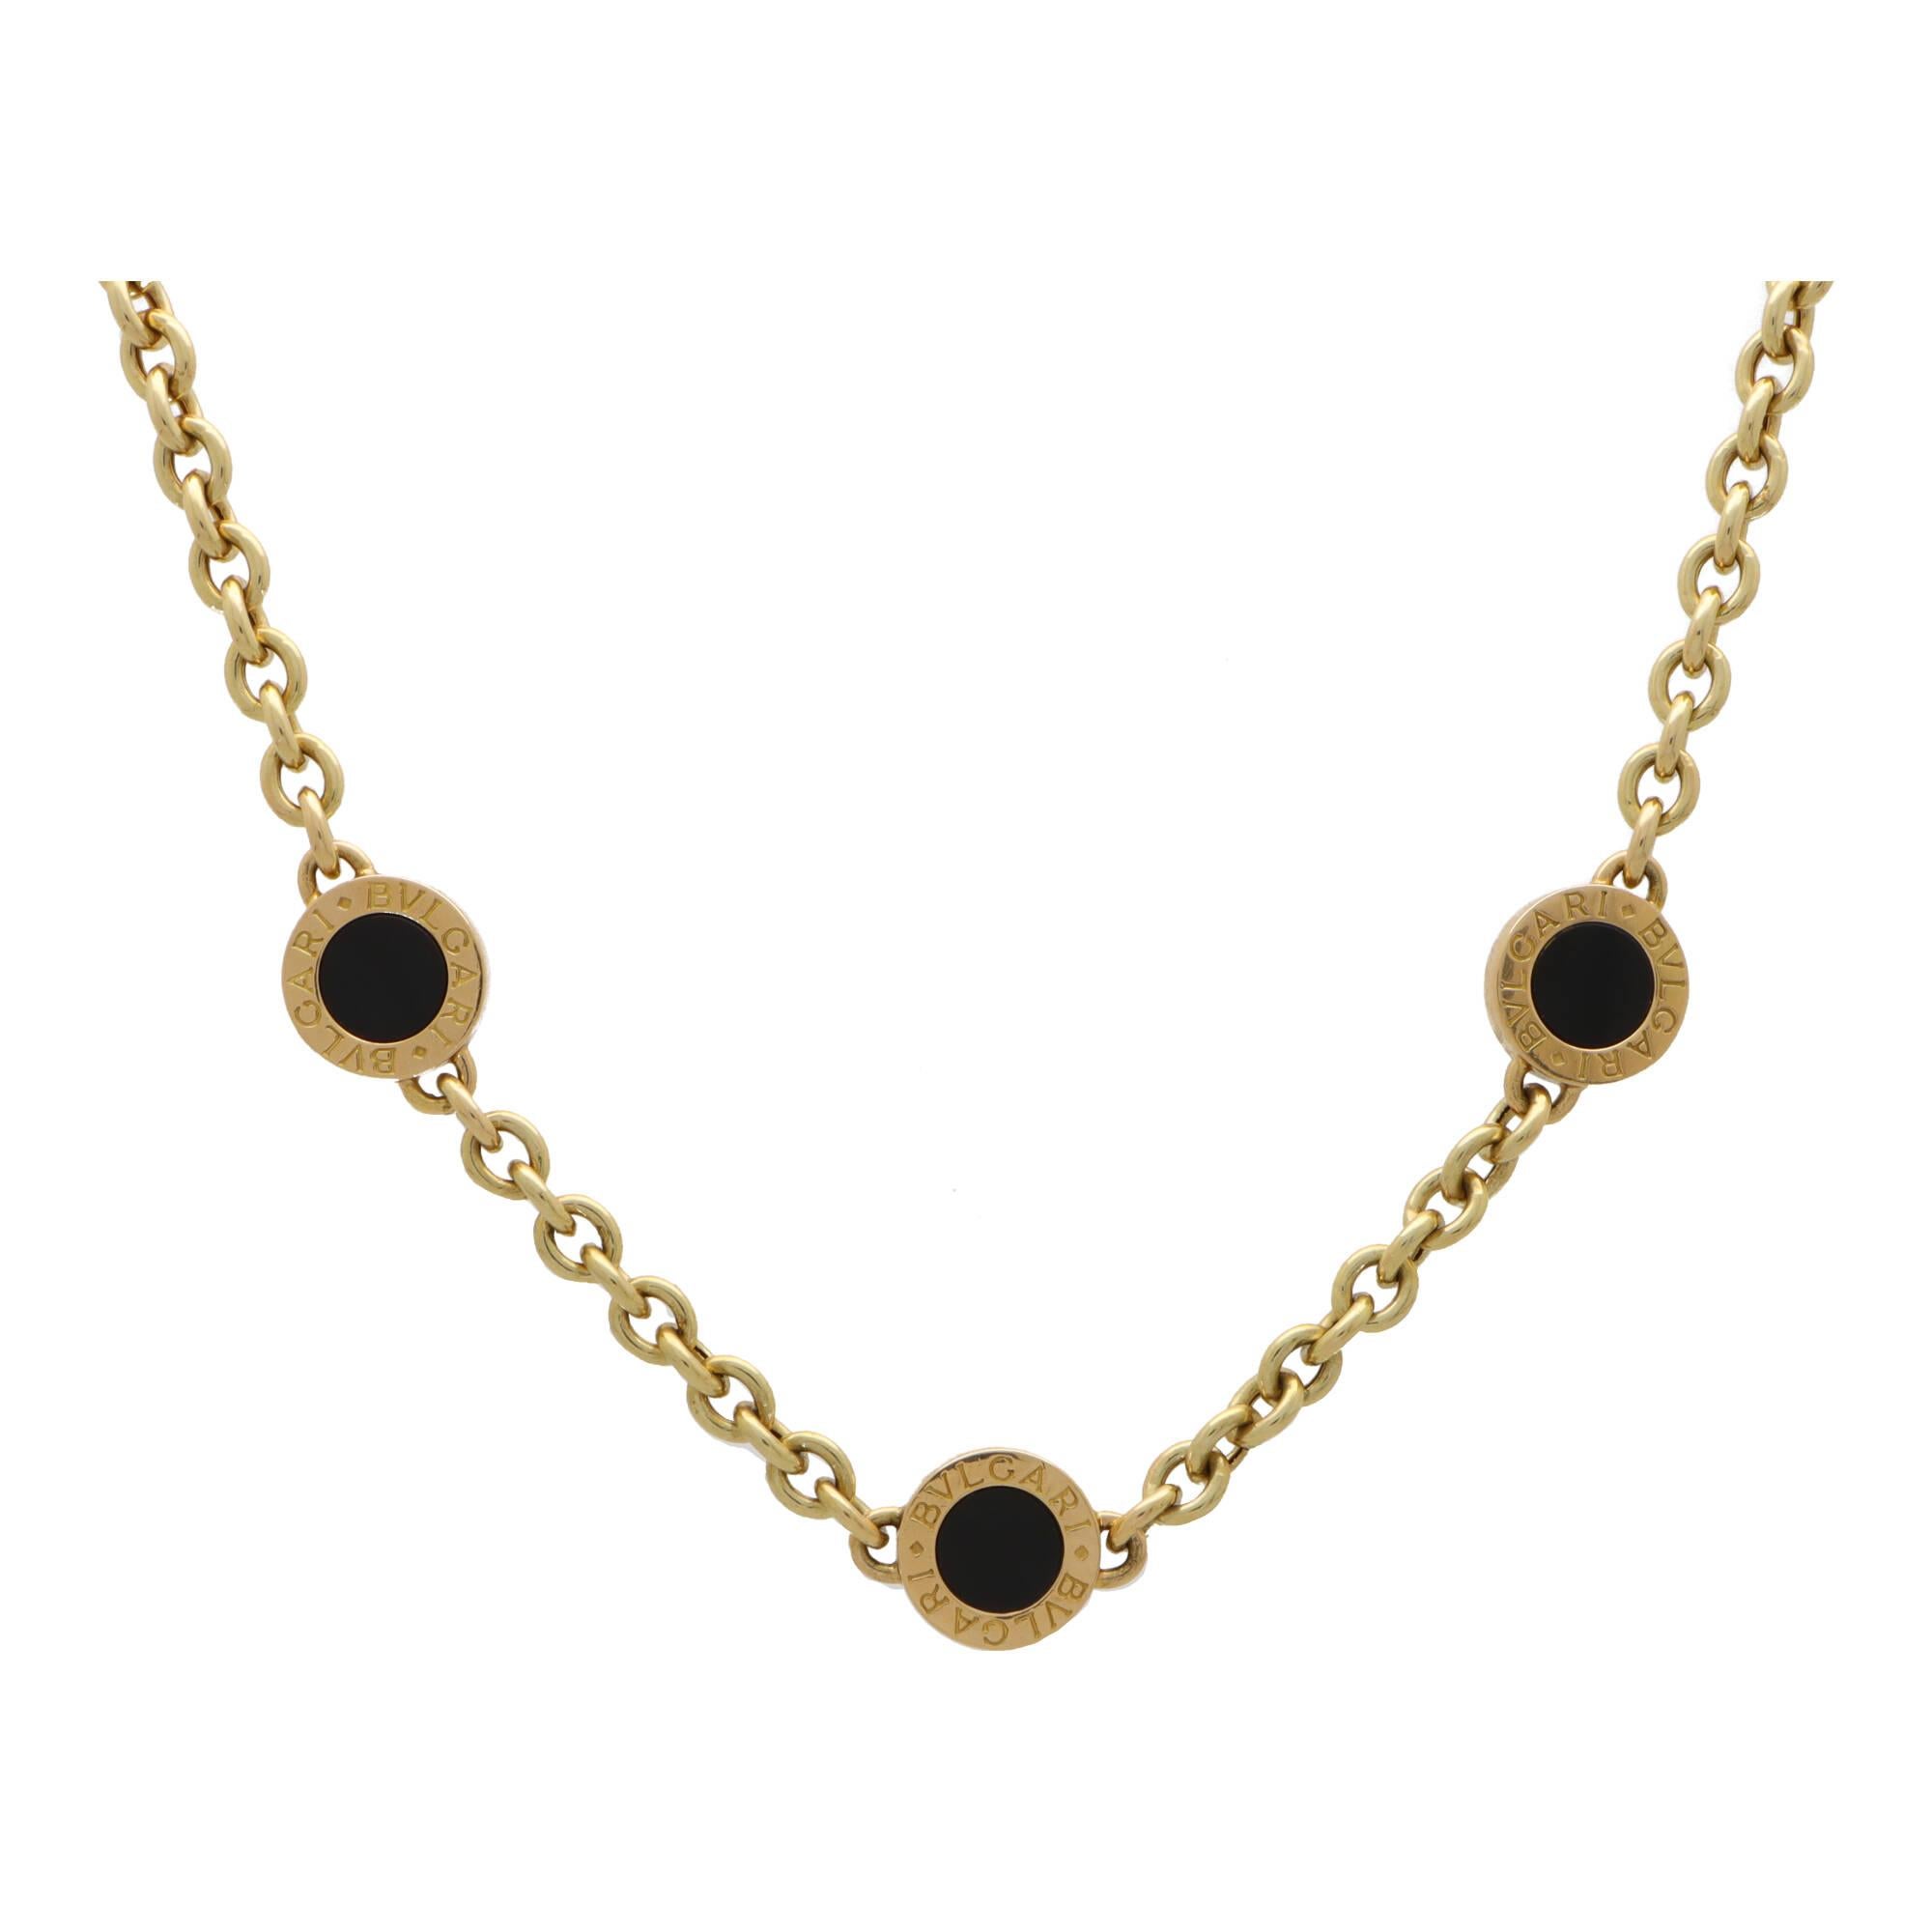 Round Cut Vintage Bvlgari Onyx Chunky Disc Necklace Set in 18k Yellow Gold